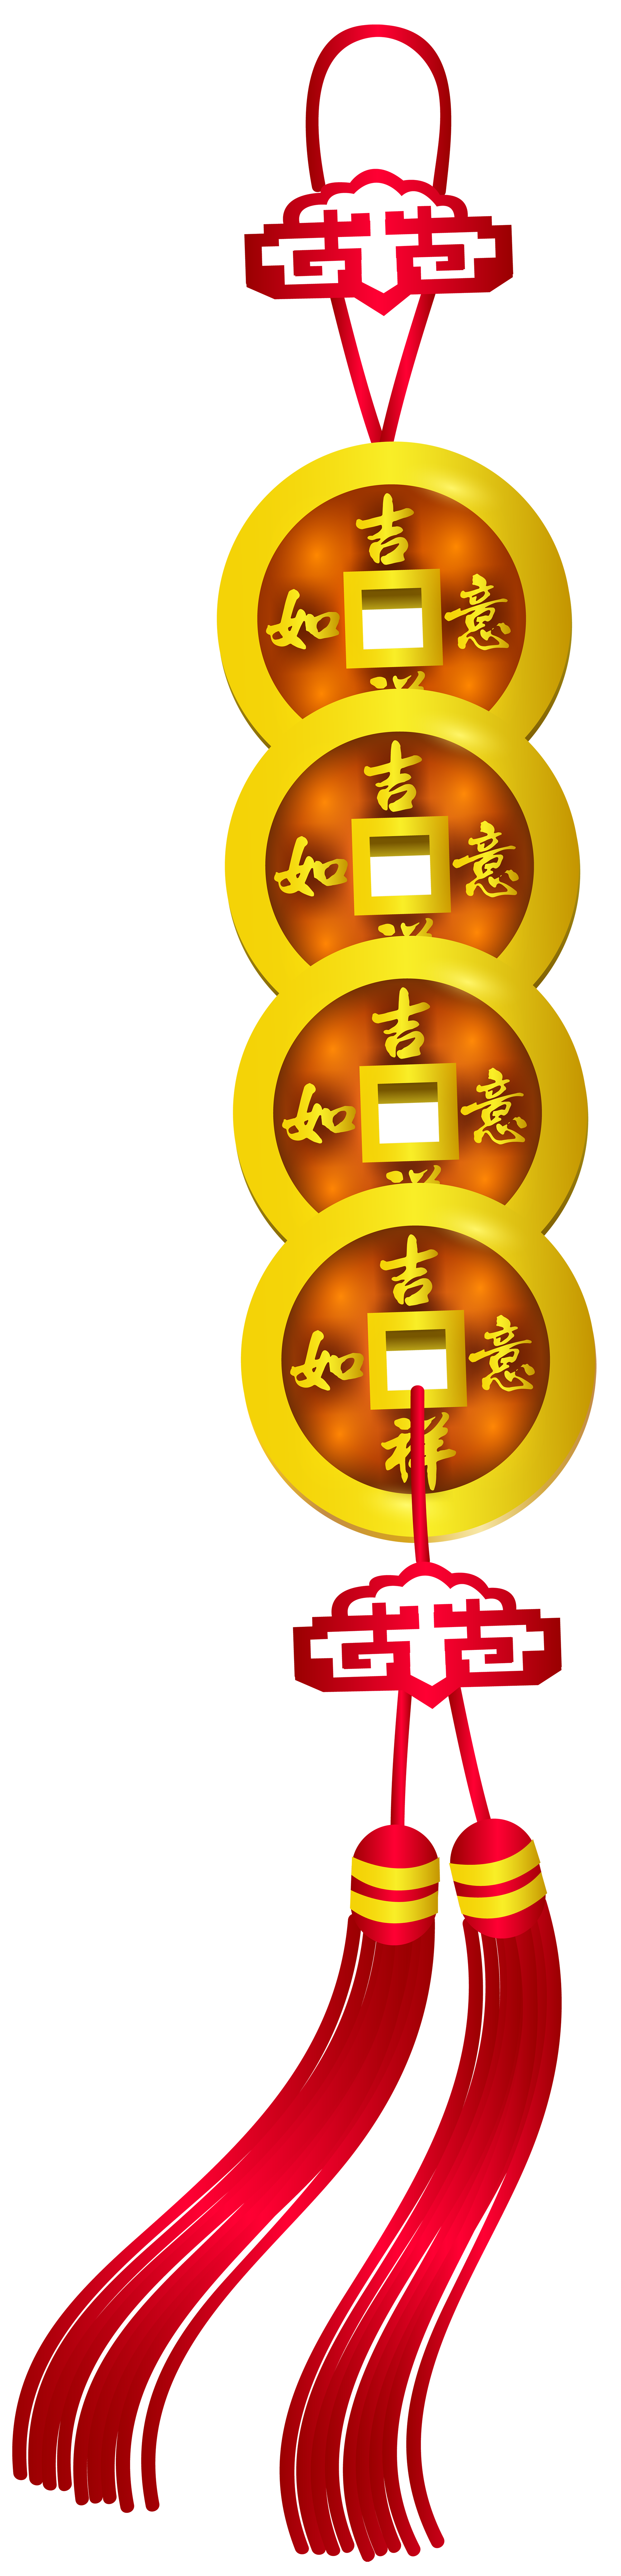 Chinese New Year Decoration PNG Clip Art.